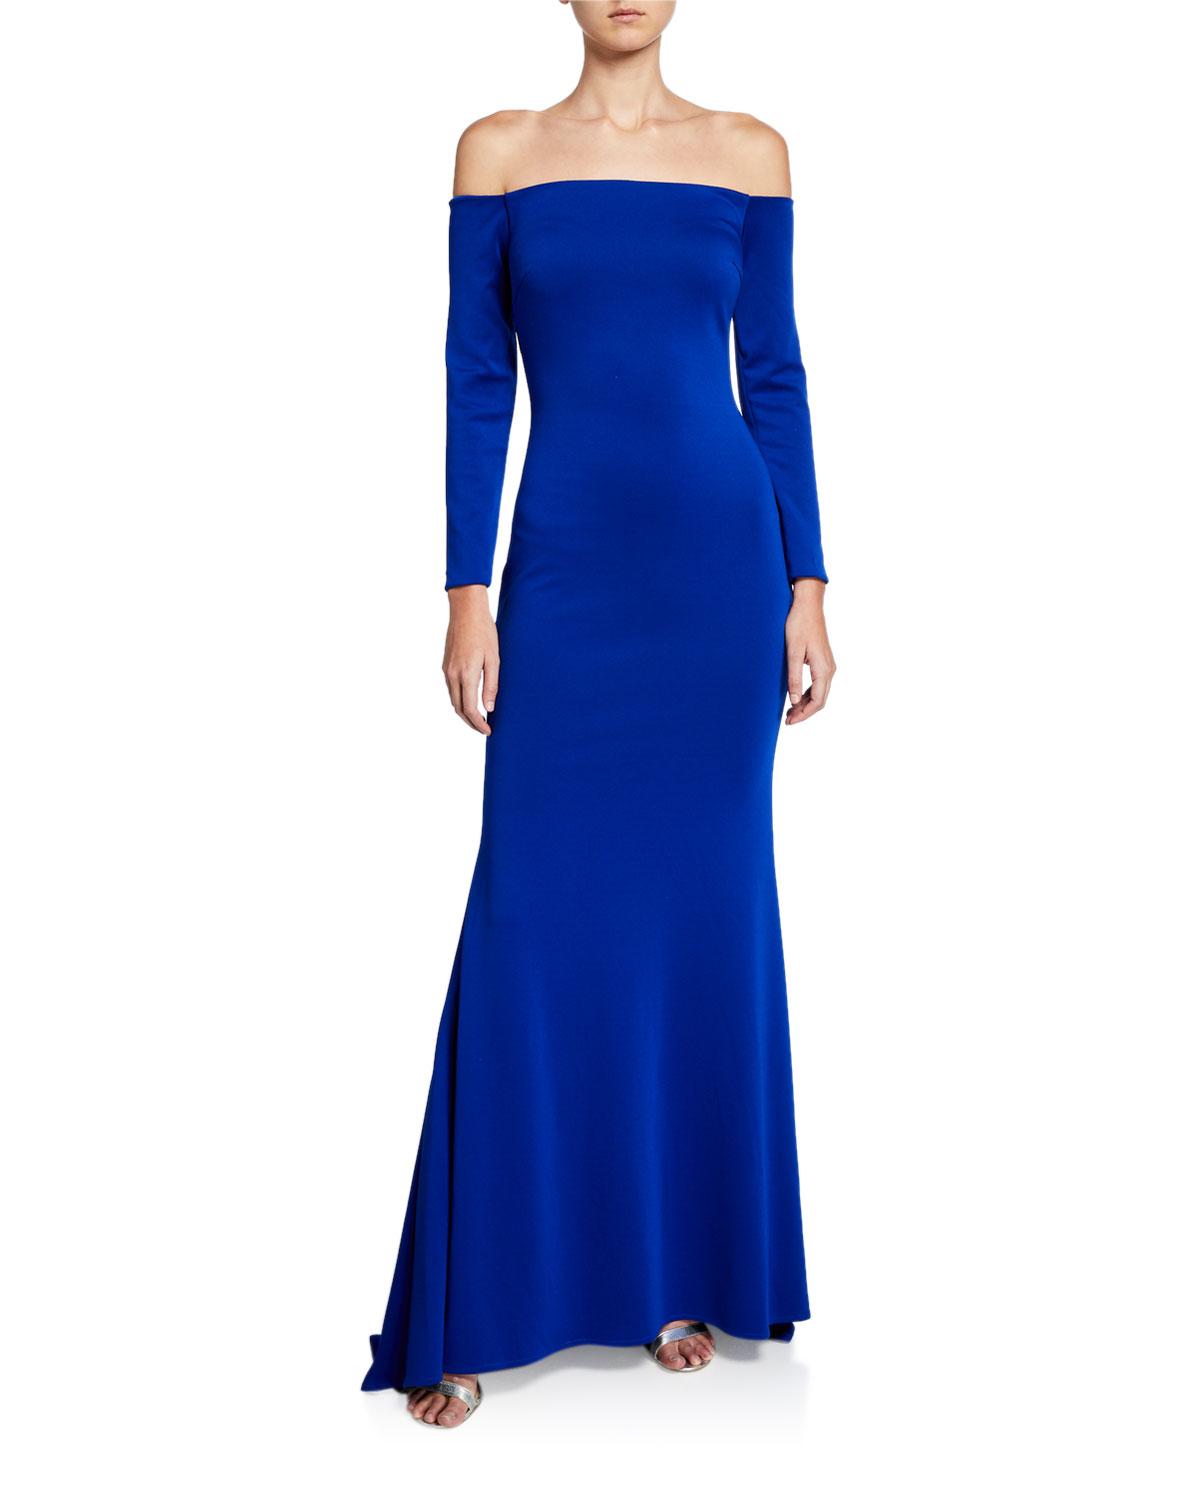 Jovani Synthetic Off-the-shoulder Long-sleeve Gown in Blue - Lyst